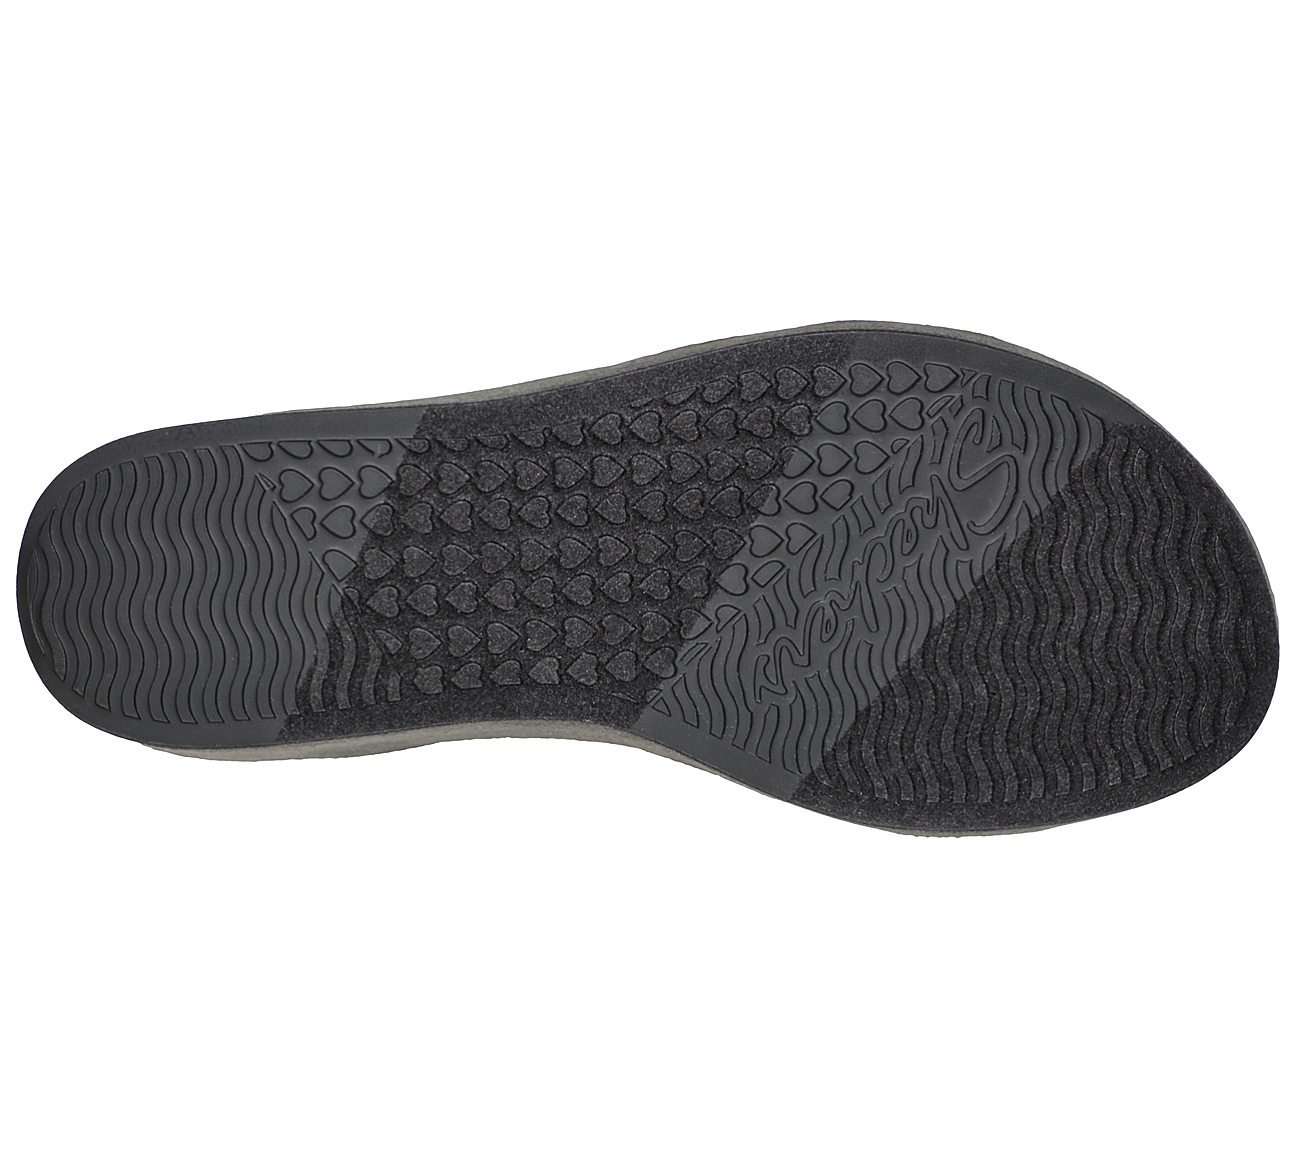 ARCH FIT RUMBLE, STONE Footwear Bottom View